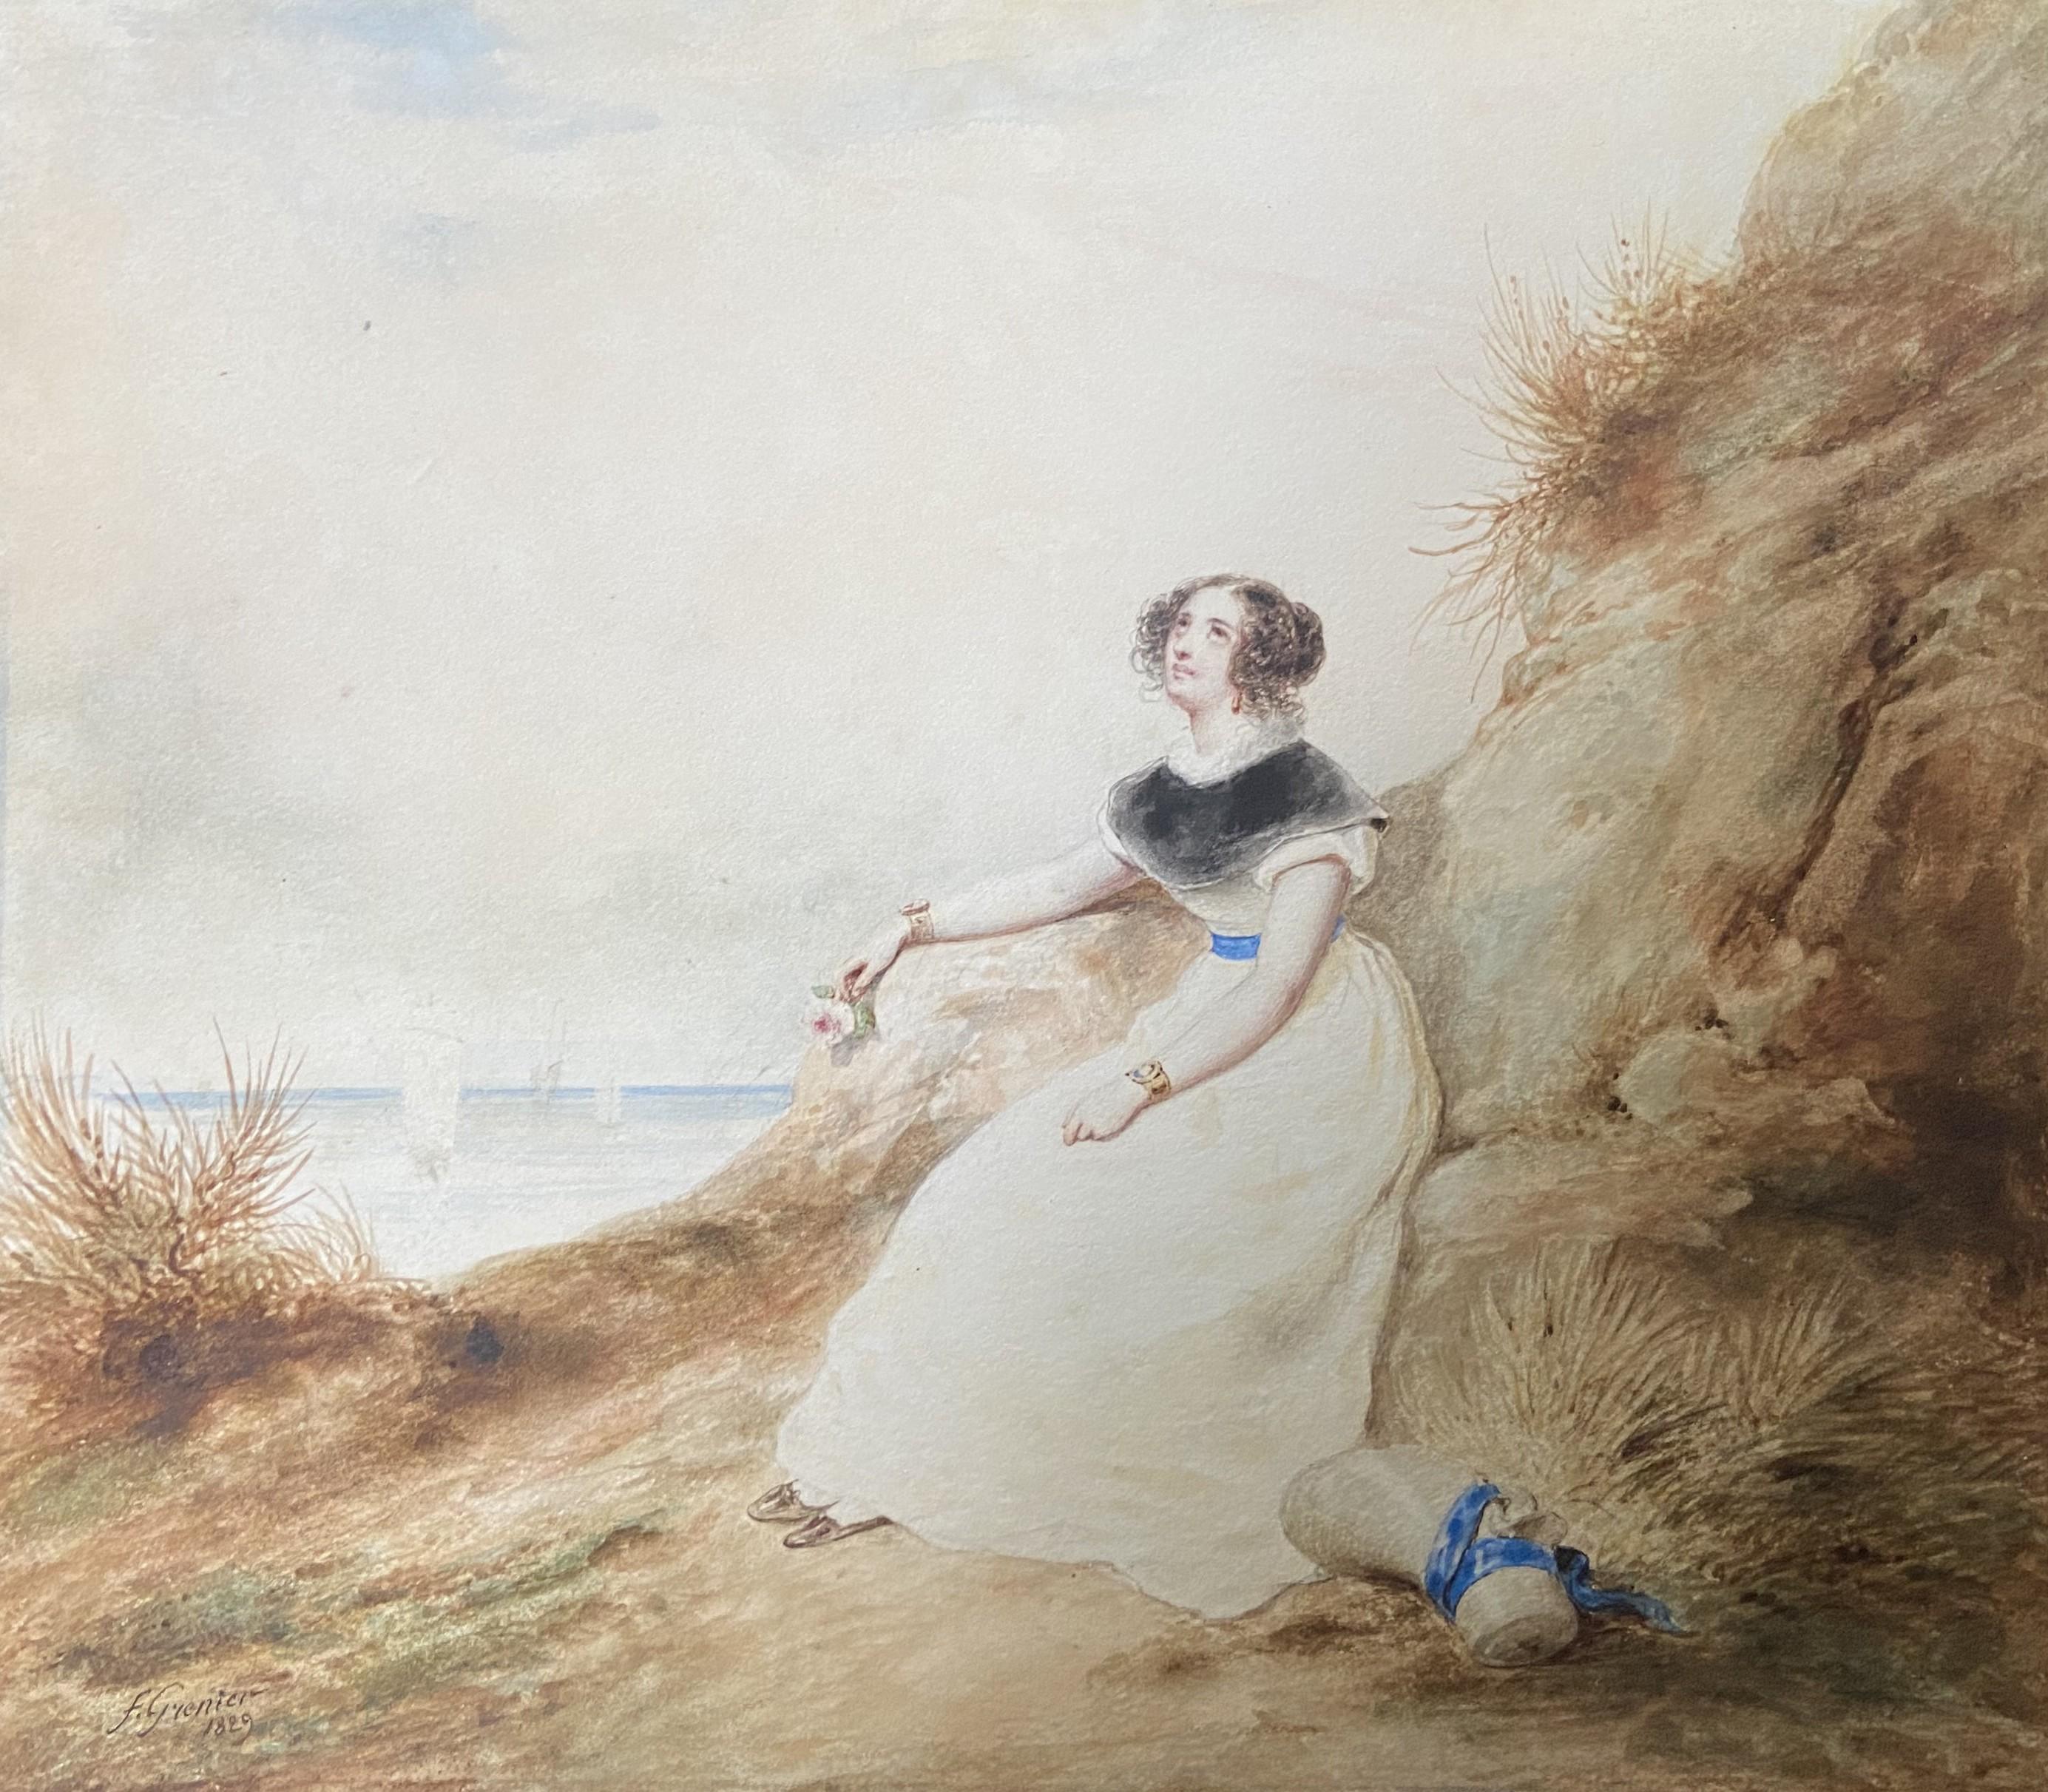 Francois Grenier de Saint Martin (1793-1867) 
A Young Lady on the beach, 1829, 
signed and dated on the lower left
watercolor on paper
17 x 19.5 cm
Framed 30 x 32.3 cm

In many ways, this delicate watercolor is archetypal of Romantic art: the